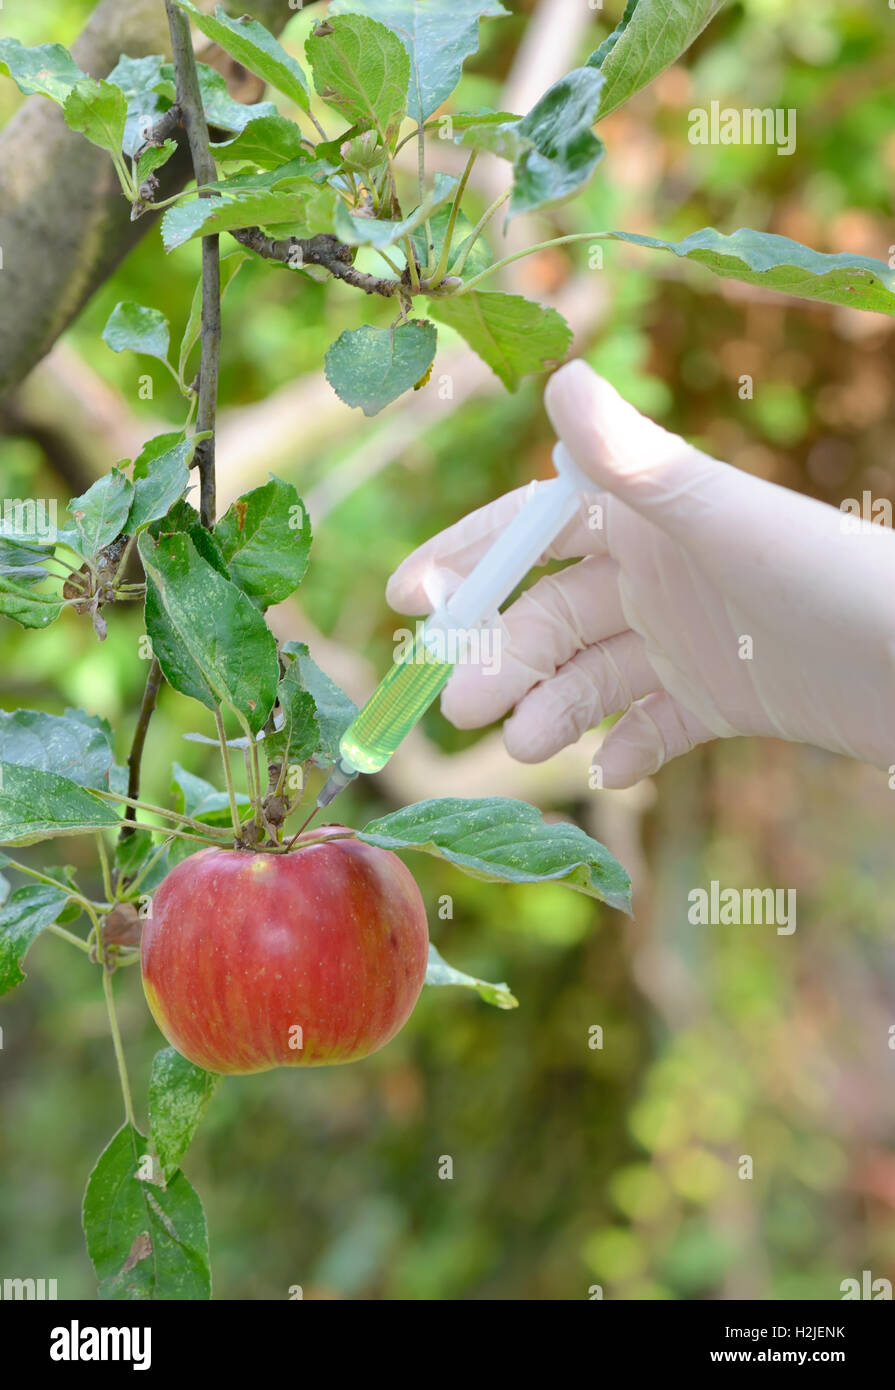 Injecting liquid to red apple using syringe in orchard Stock Photo